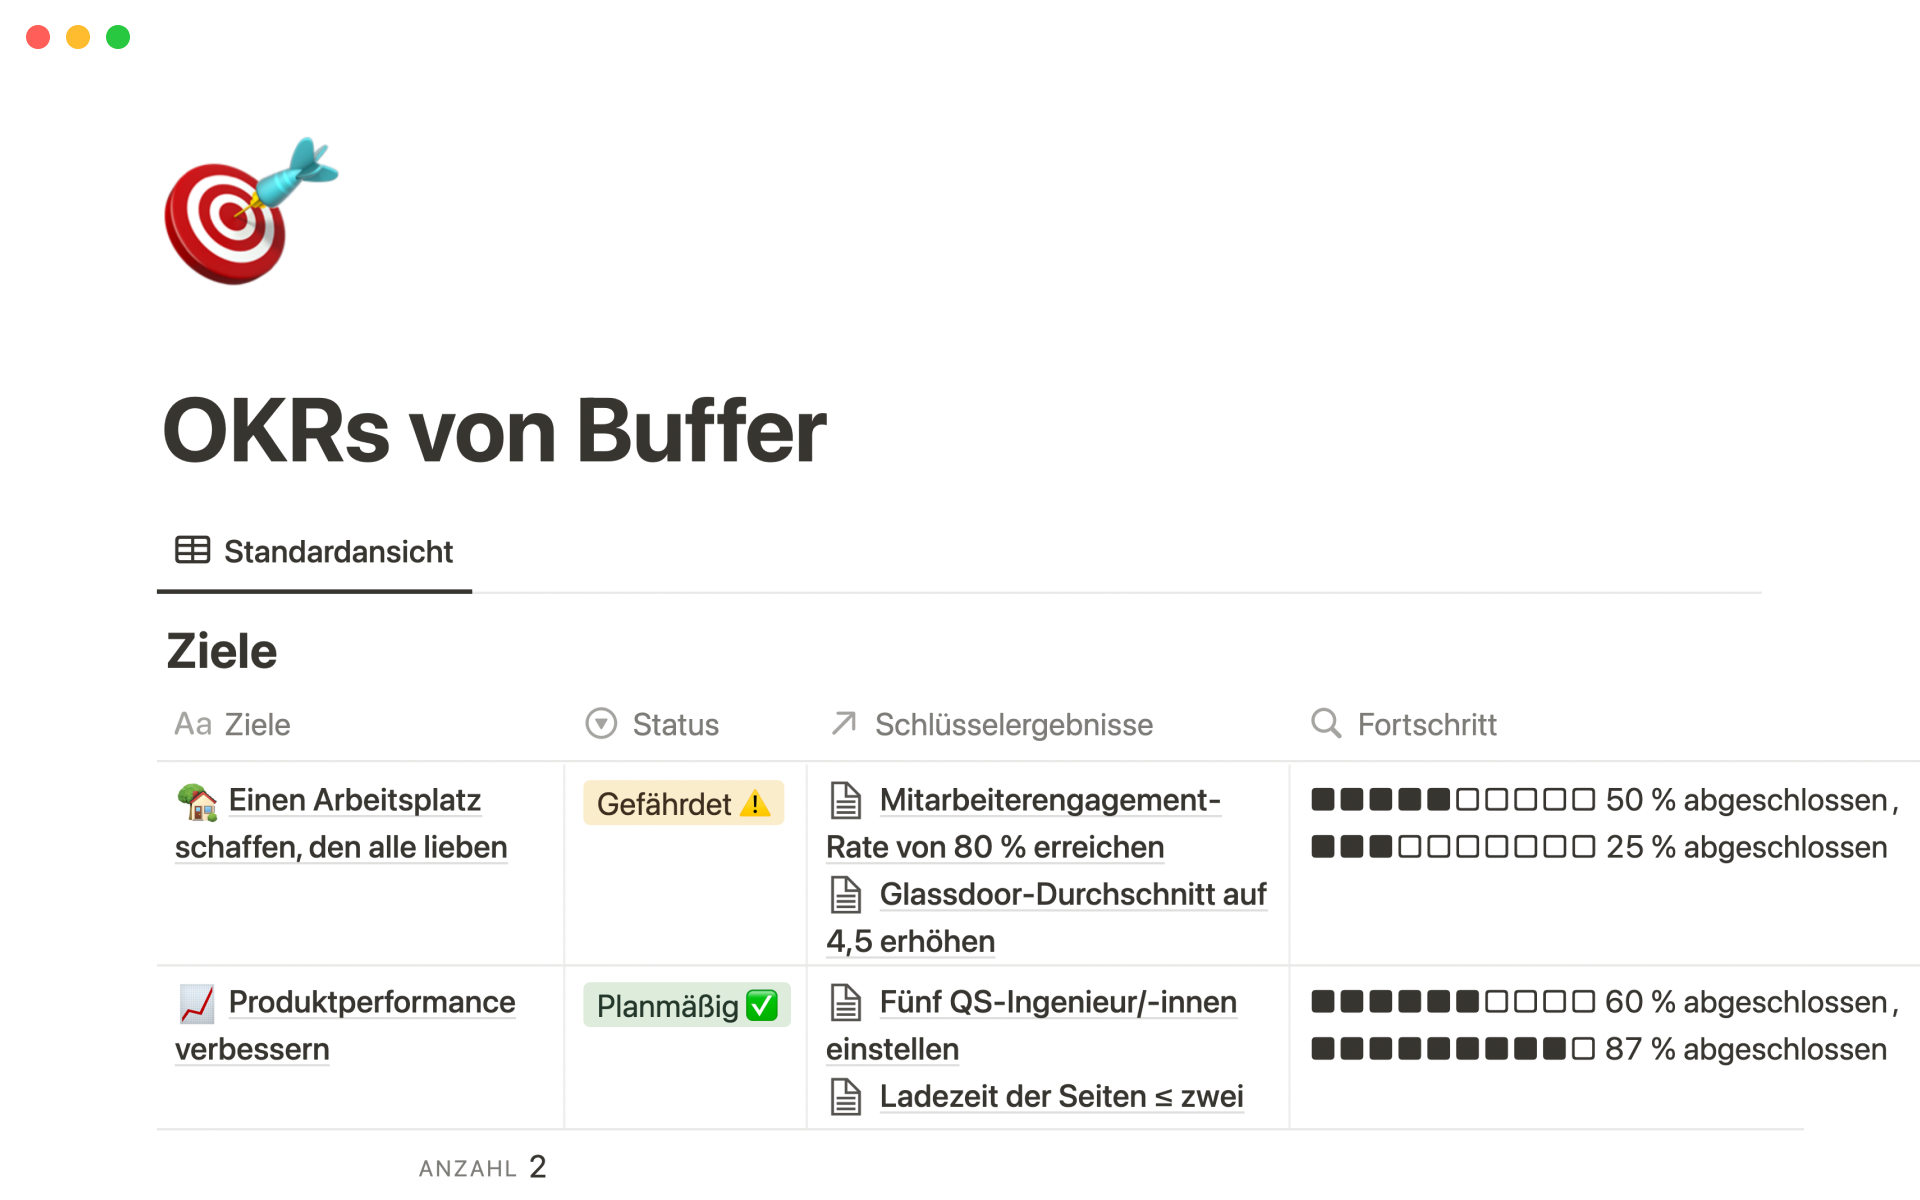 The desktop image for the Buffer's OKRs template